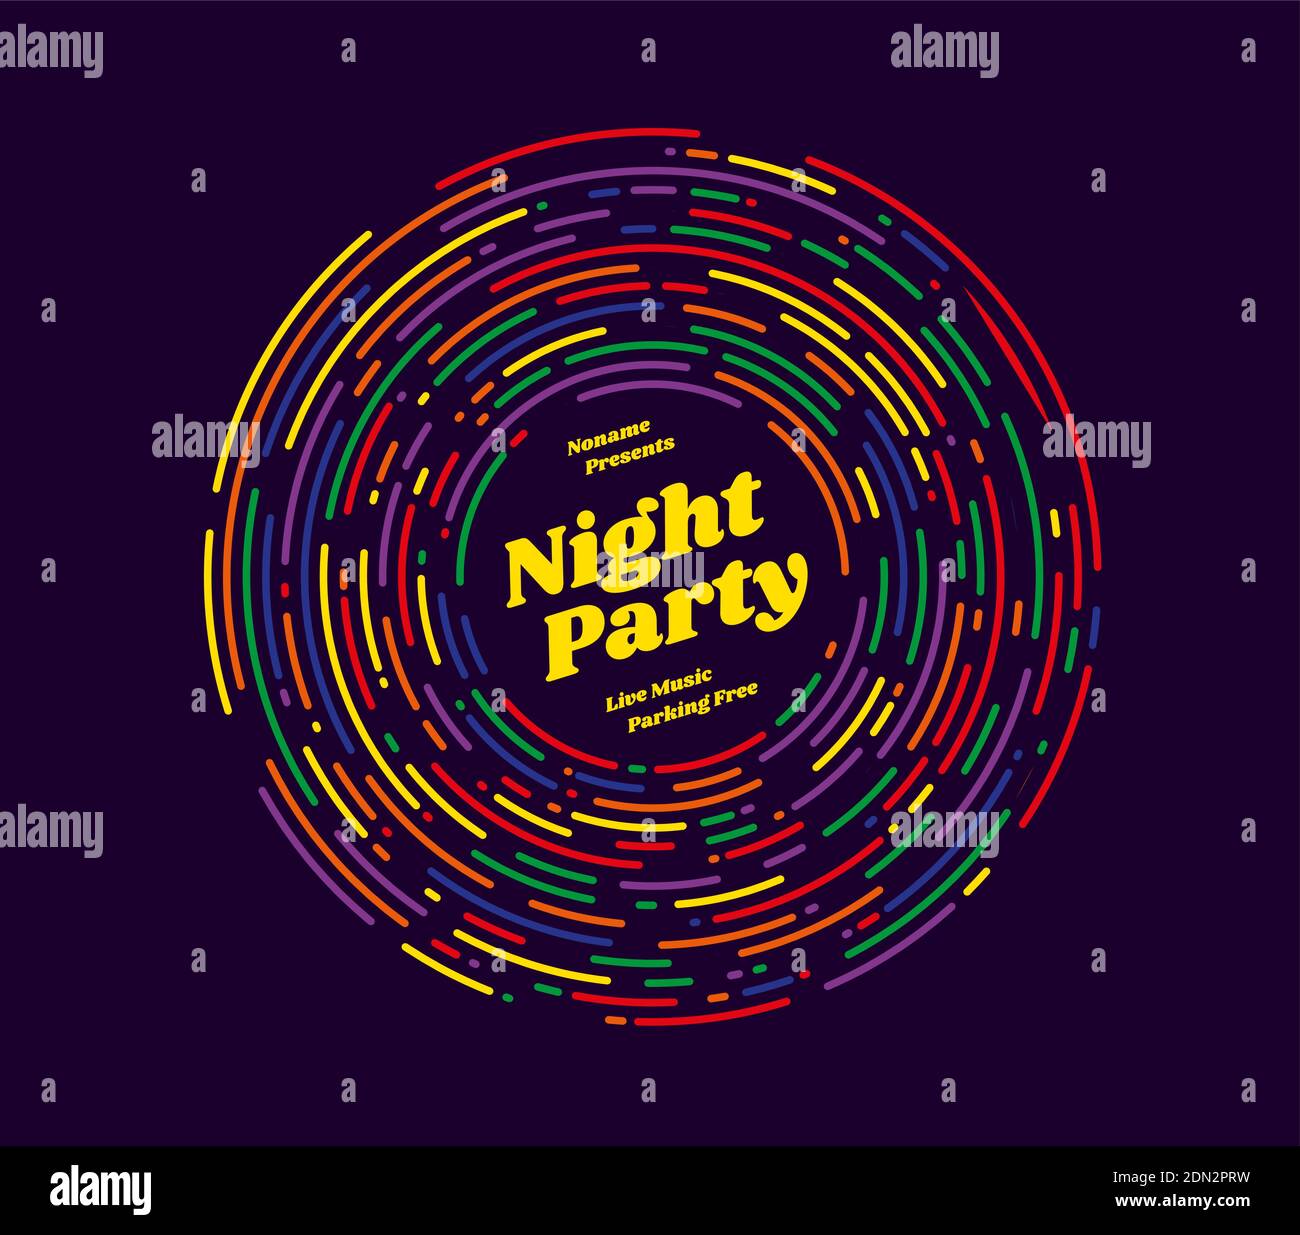 Night party vector illustration. Irregular rounded lines design style. Stock Vector